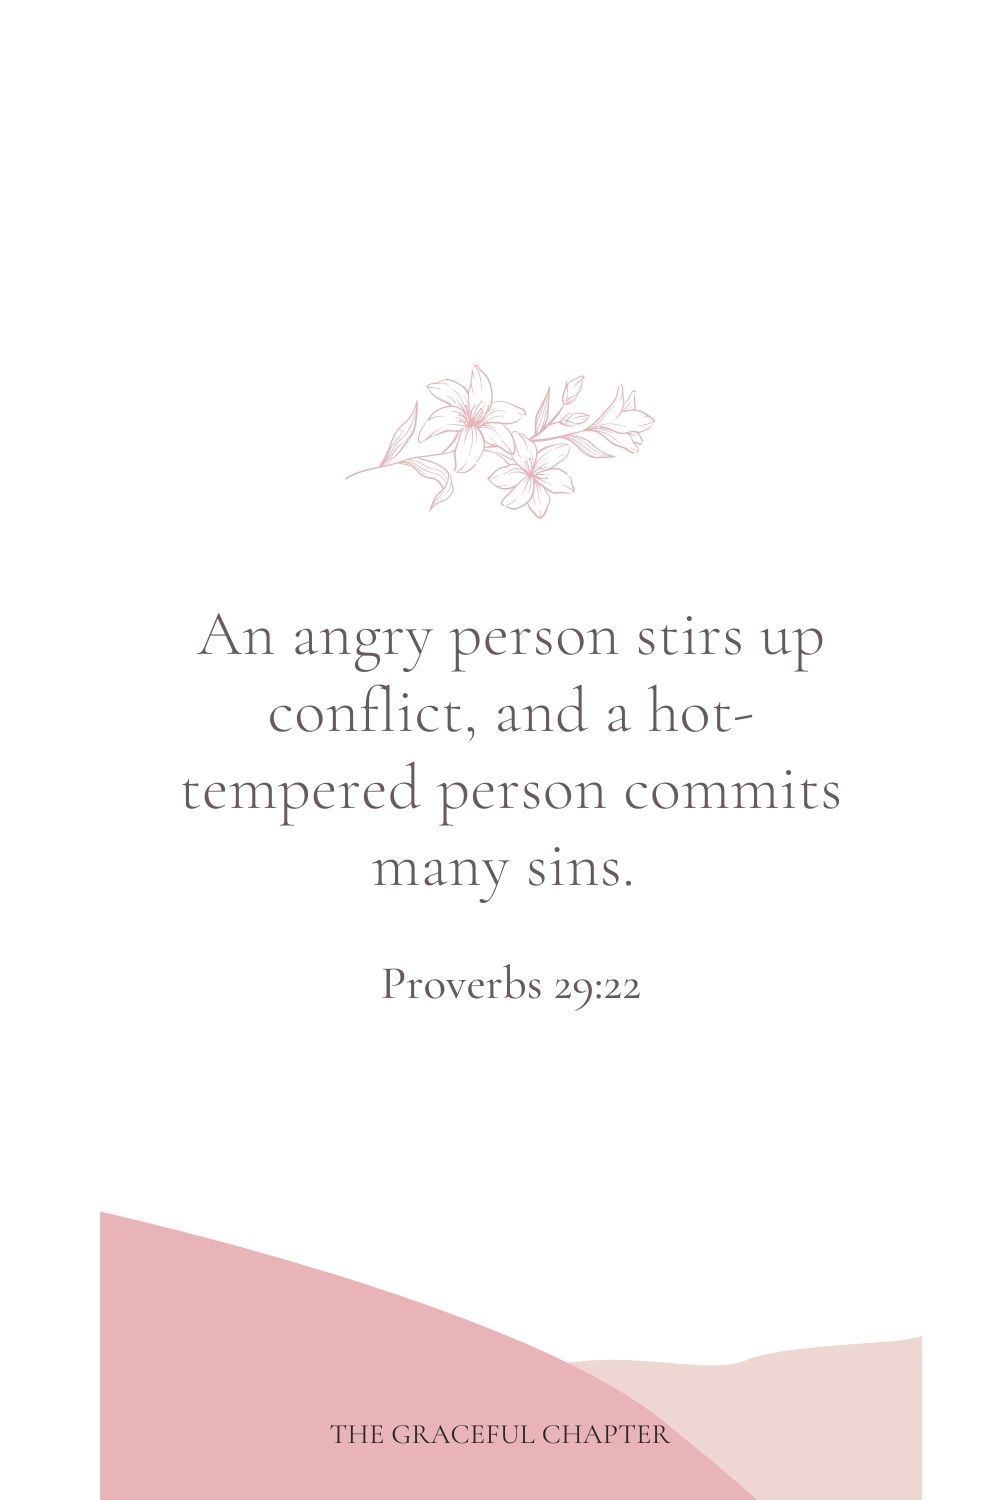 An angry person stirs up conflict, and a hot-tempered person commits many sins. Proverbs 29:22